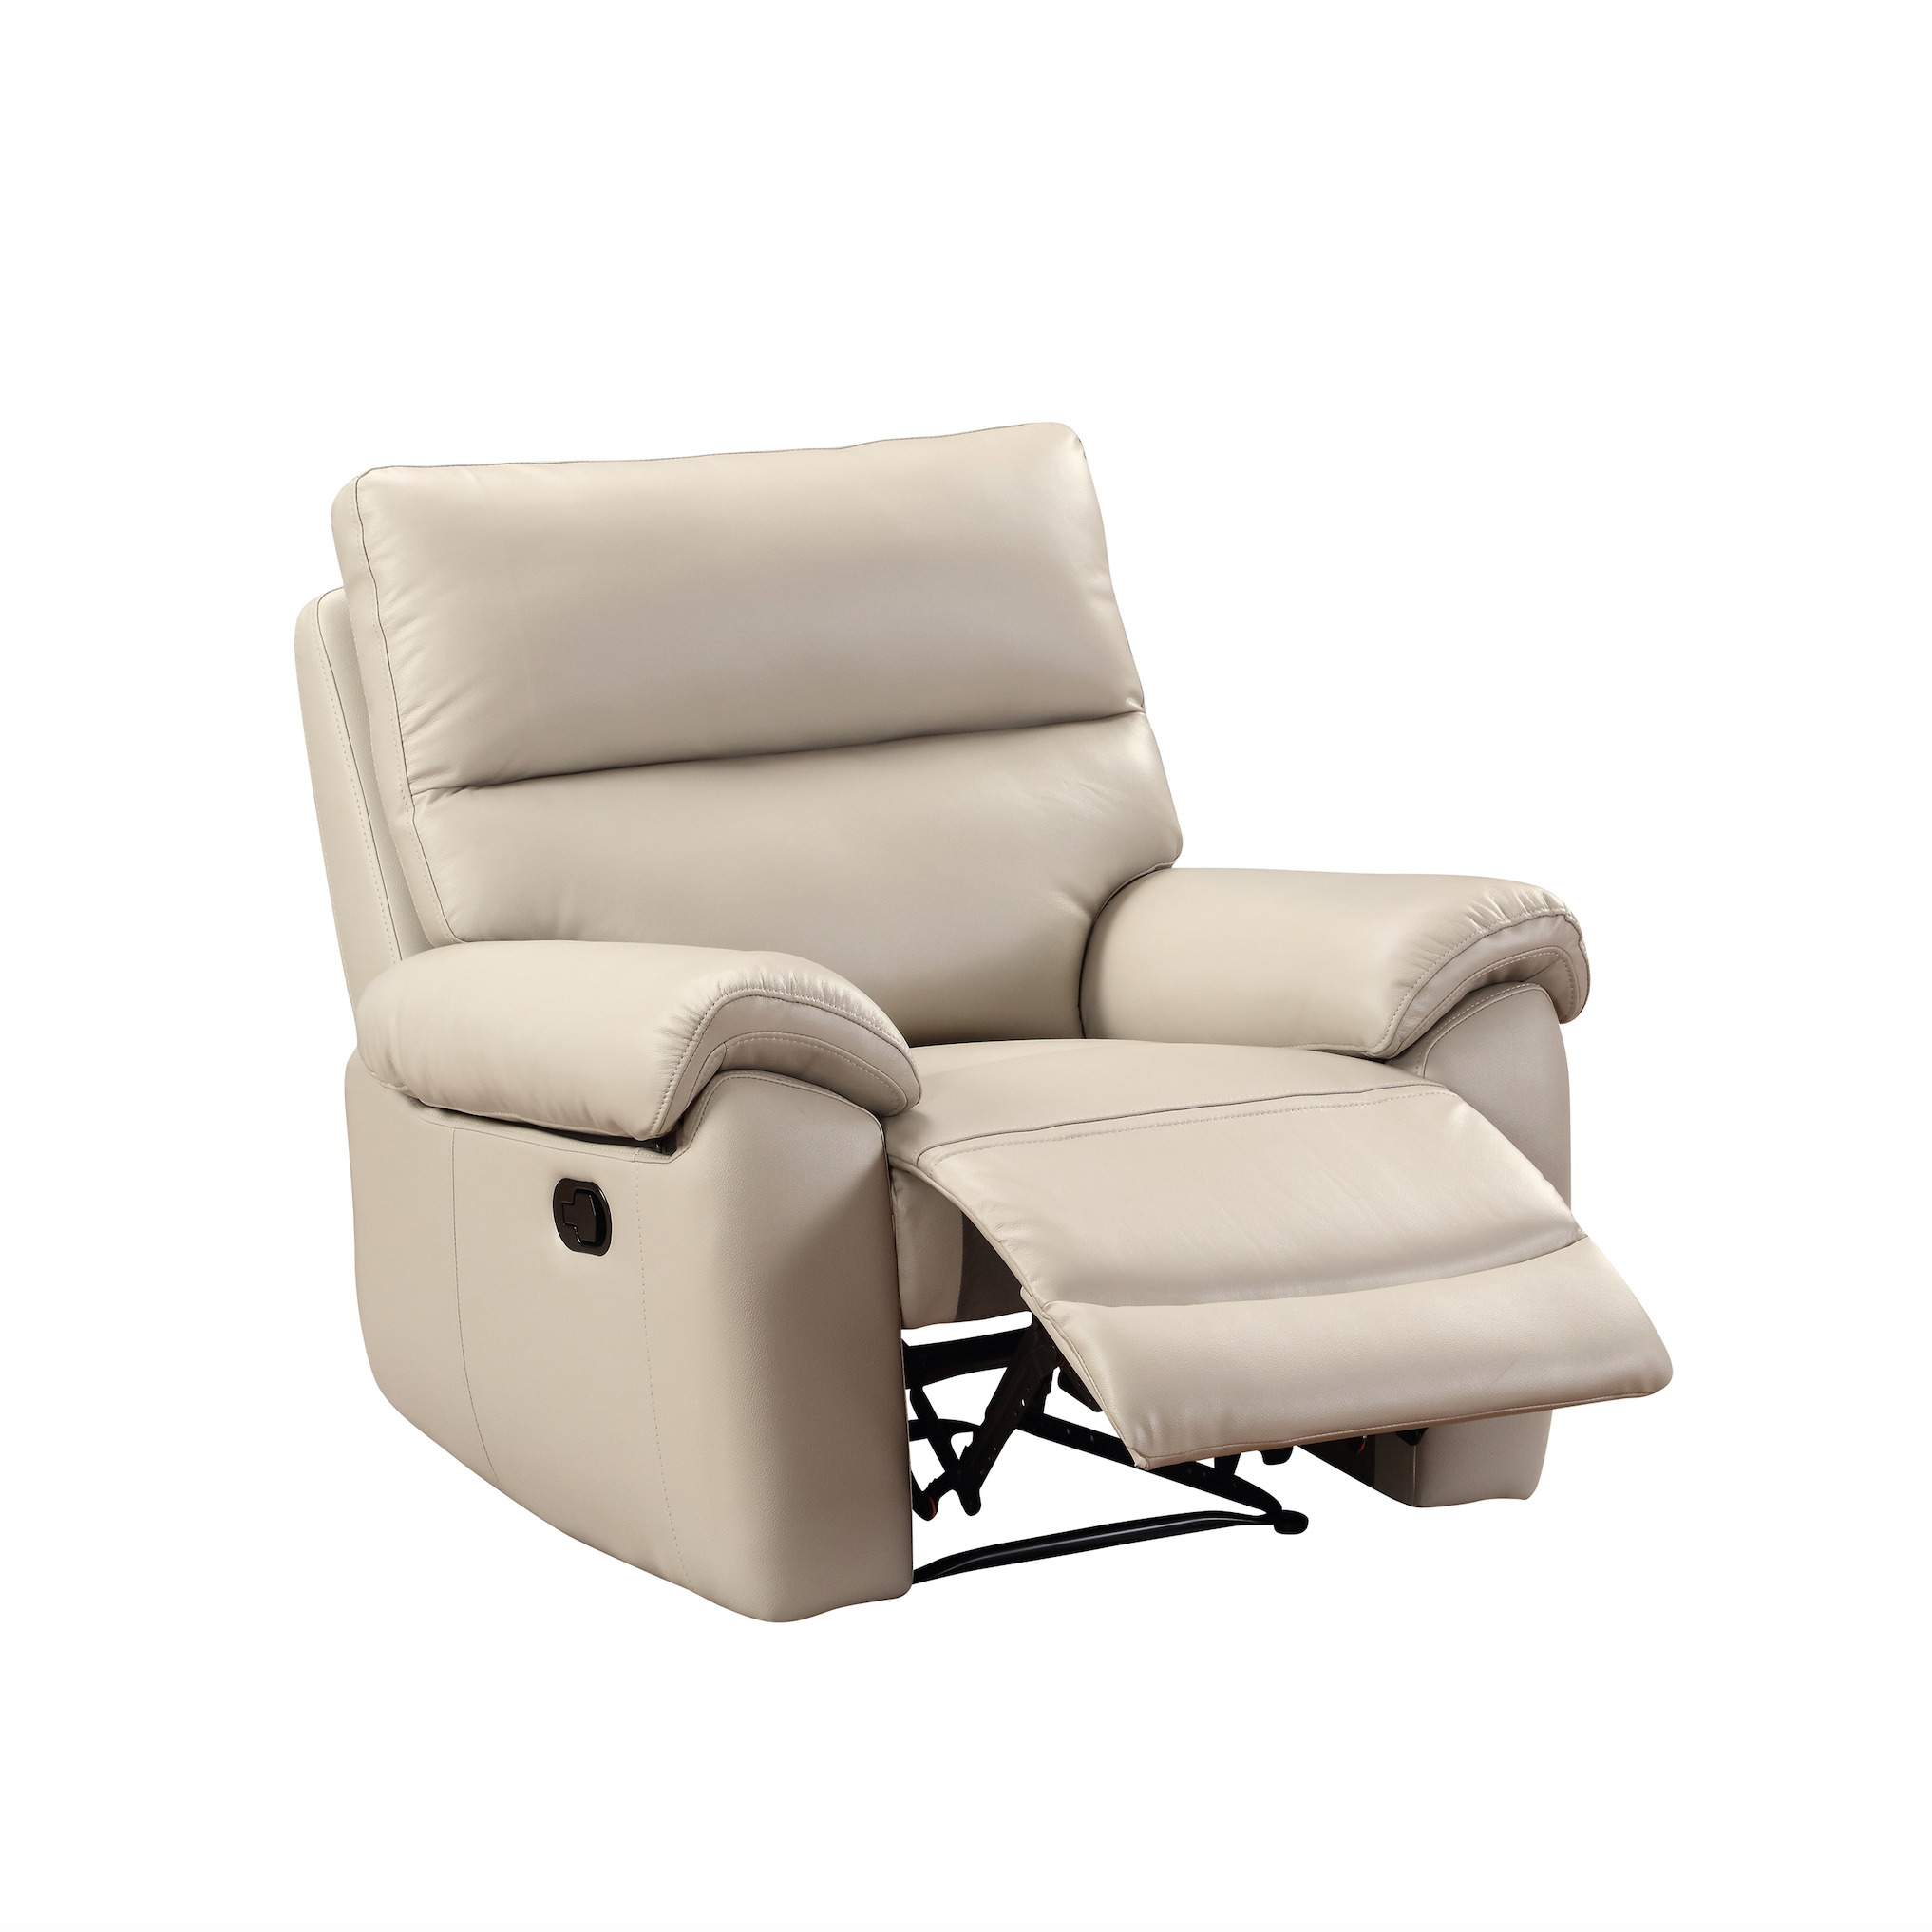 Rocco Power Recliner Chair Chalk Leather